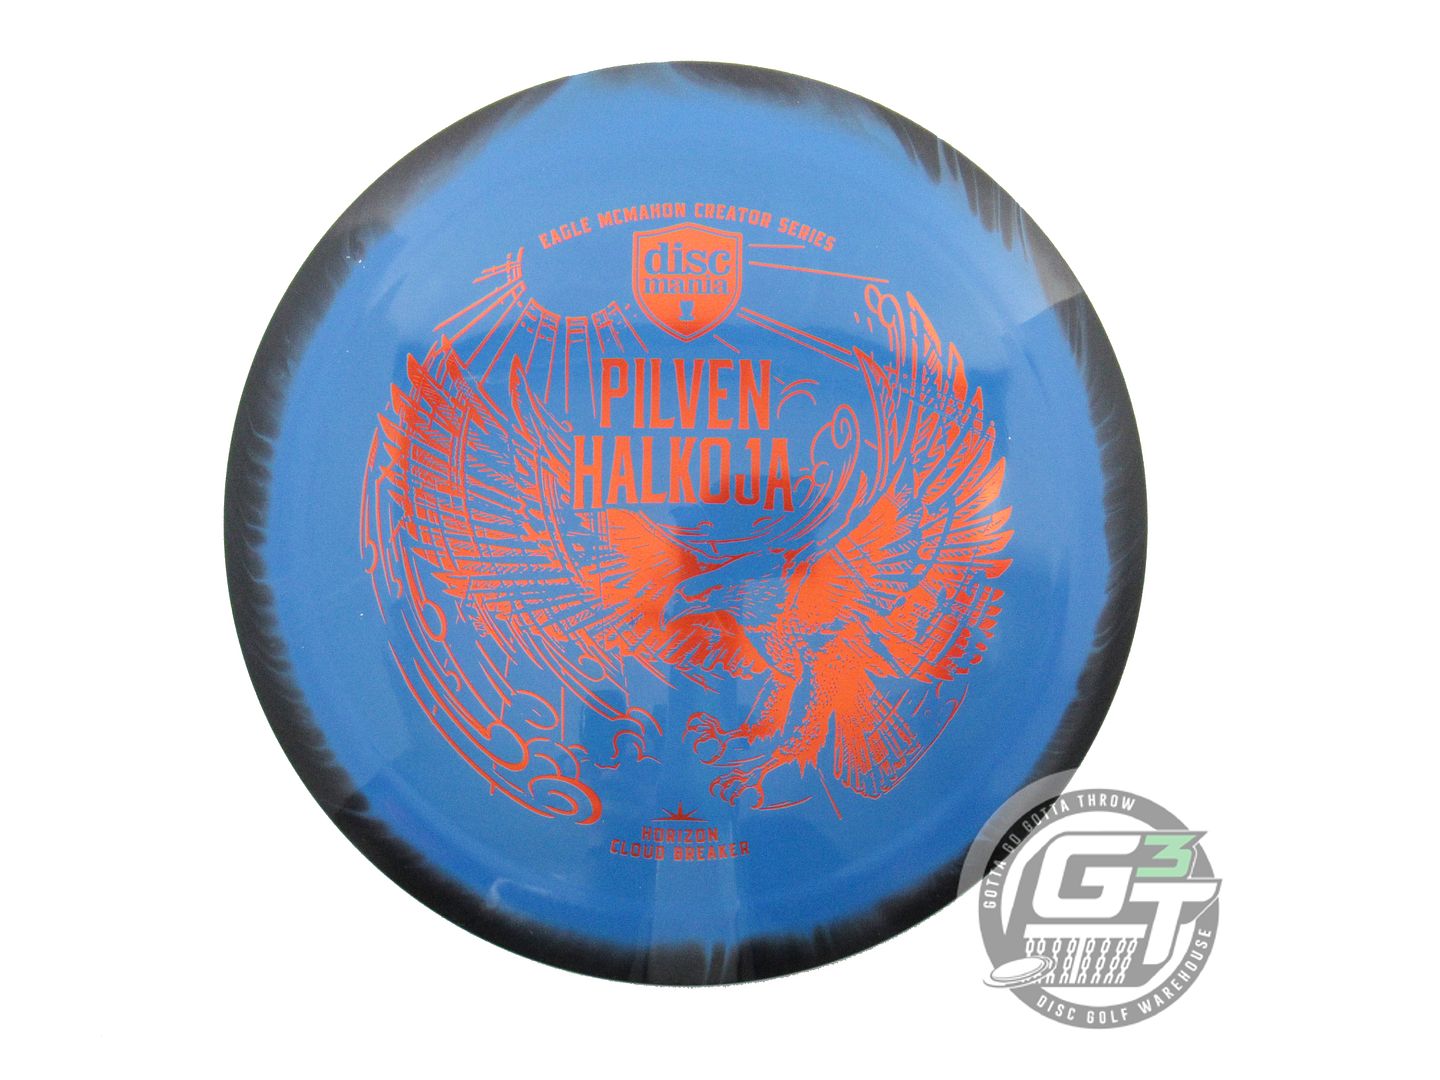 Discmania 2023 Finnish Heritage Series Eagle McMahon Horizon S-Line Cloud Breaker Distance Driver Golf Disc (Individually Listed)